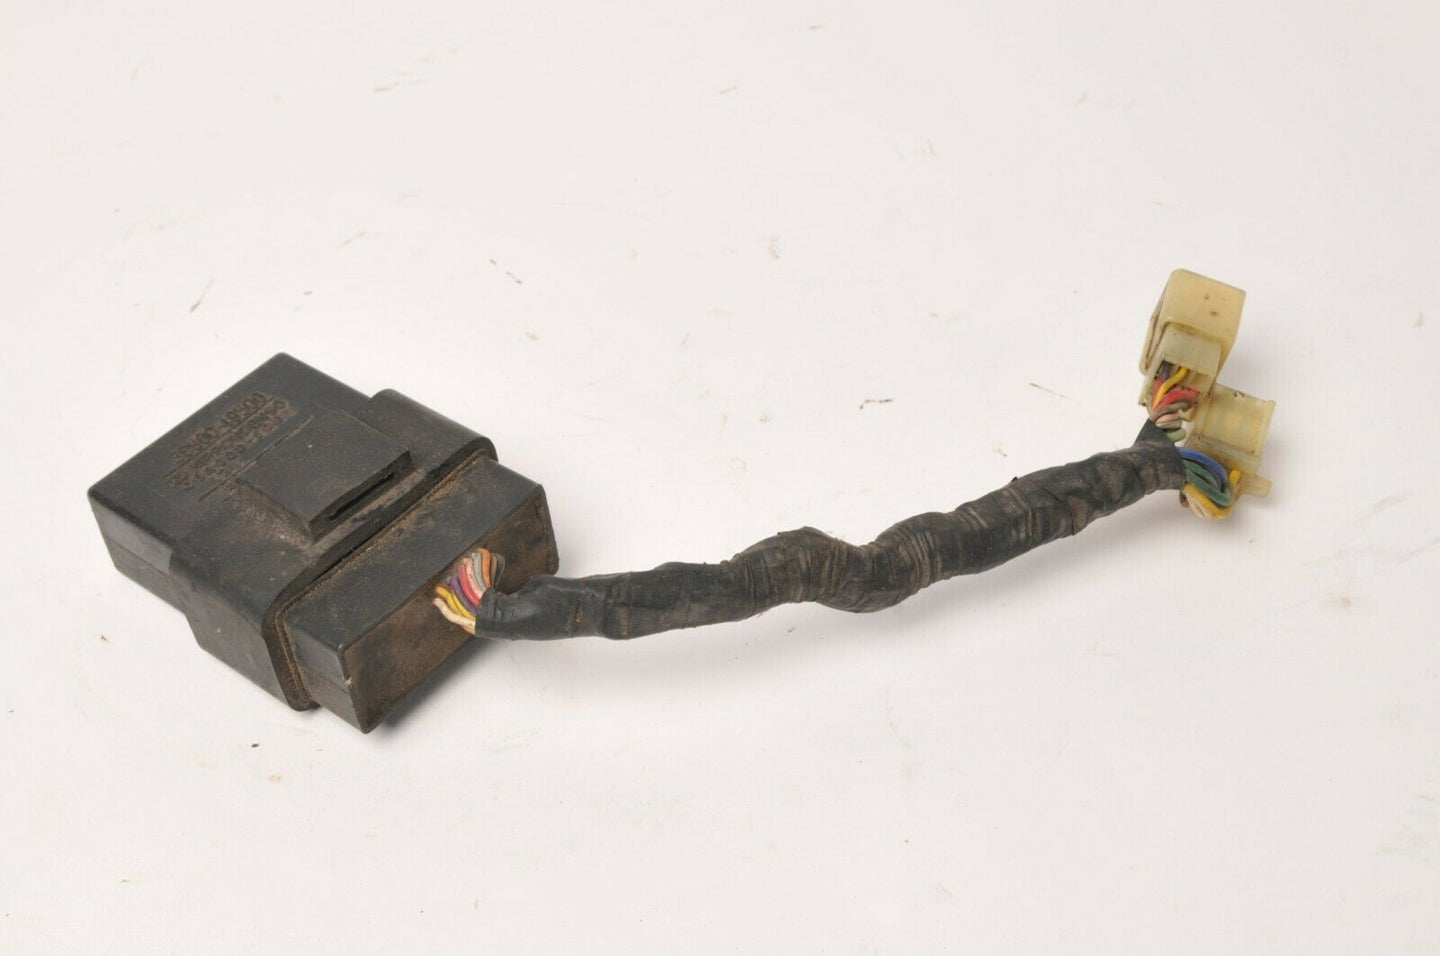 Genuine Suzuki 38860-49500 Relay Assy., Lamp Outage Warning - GS1100 GS1150 +